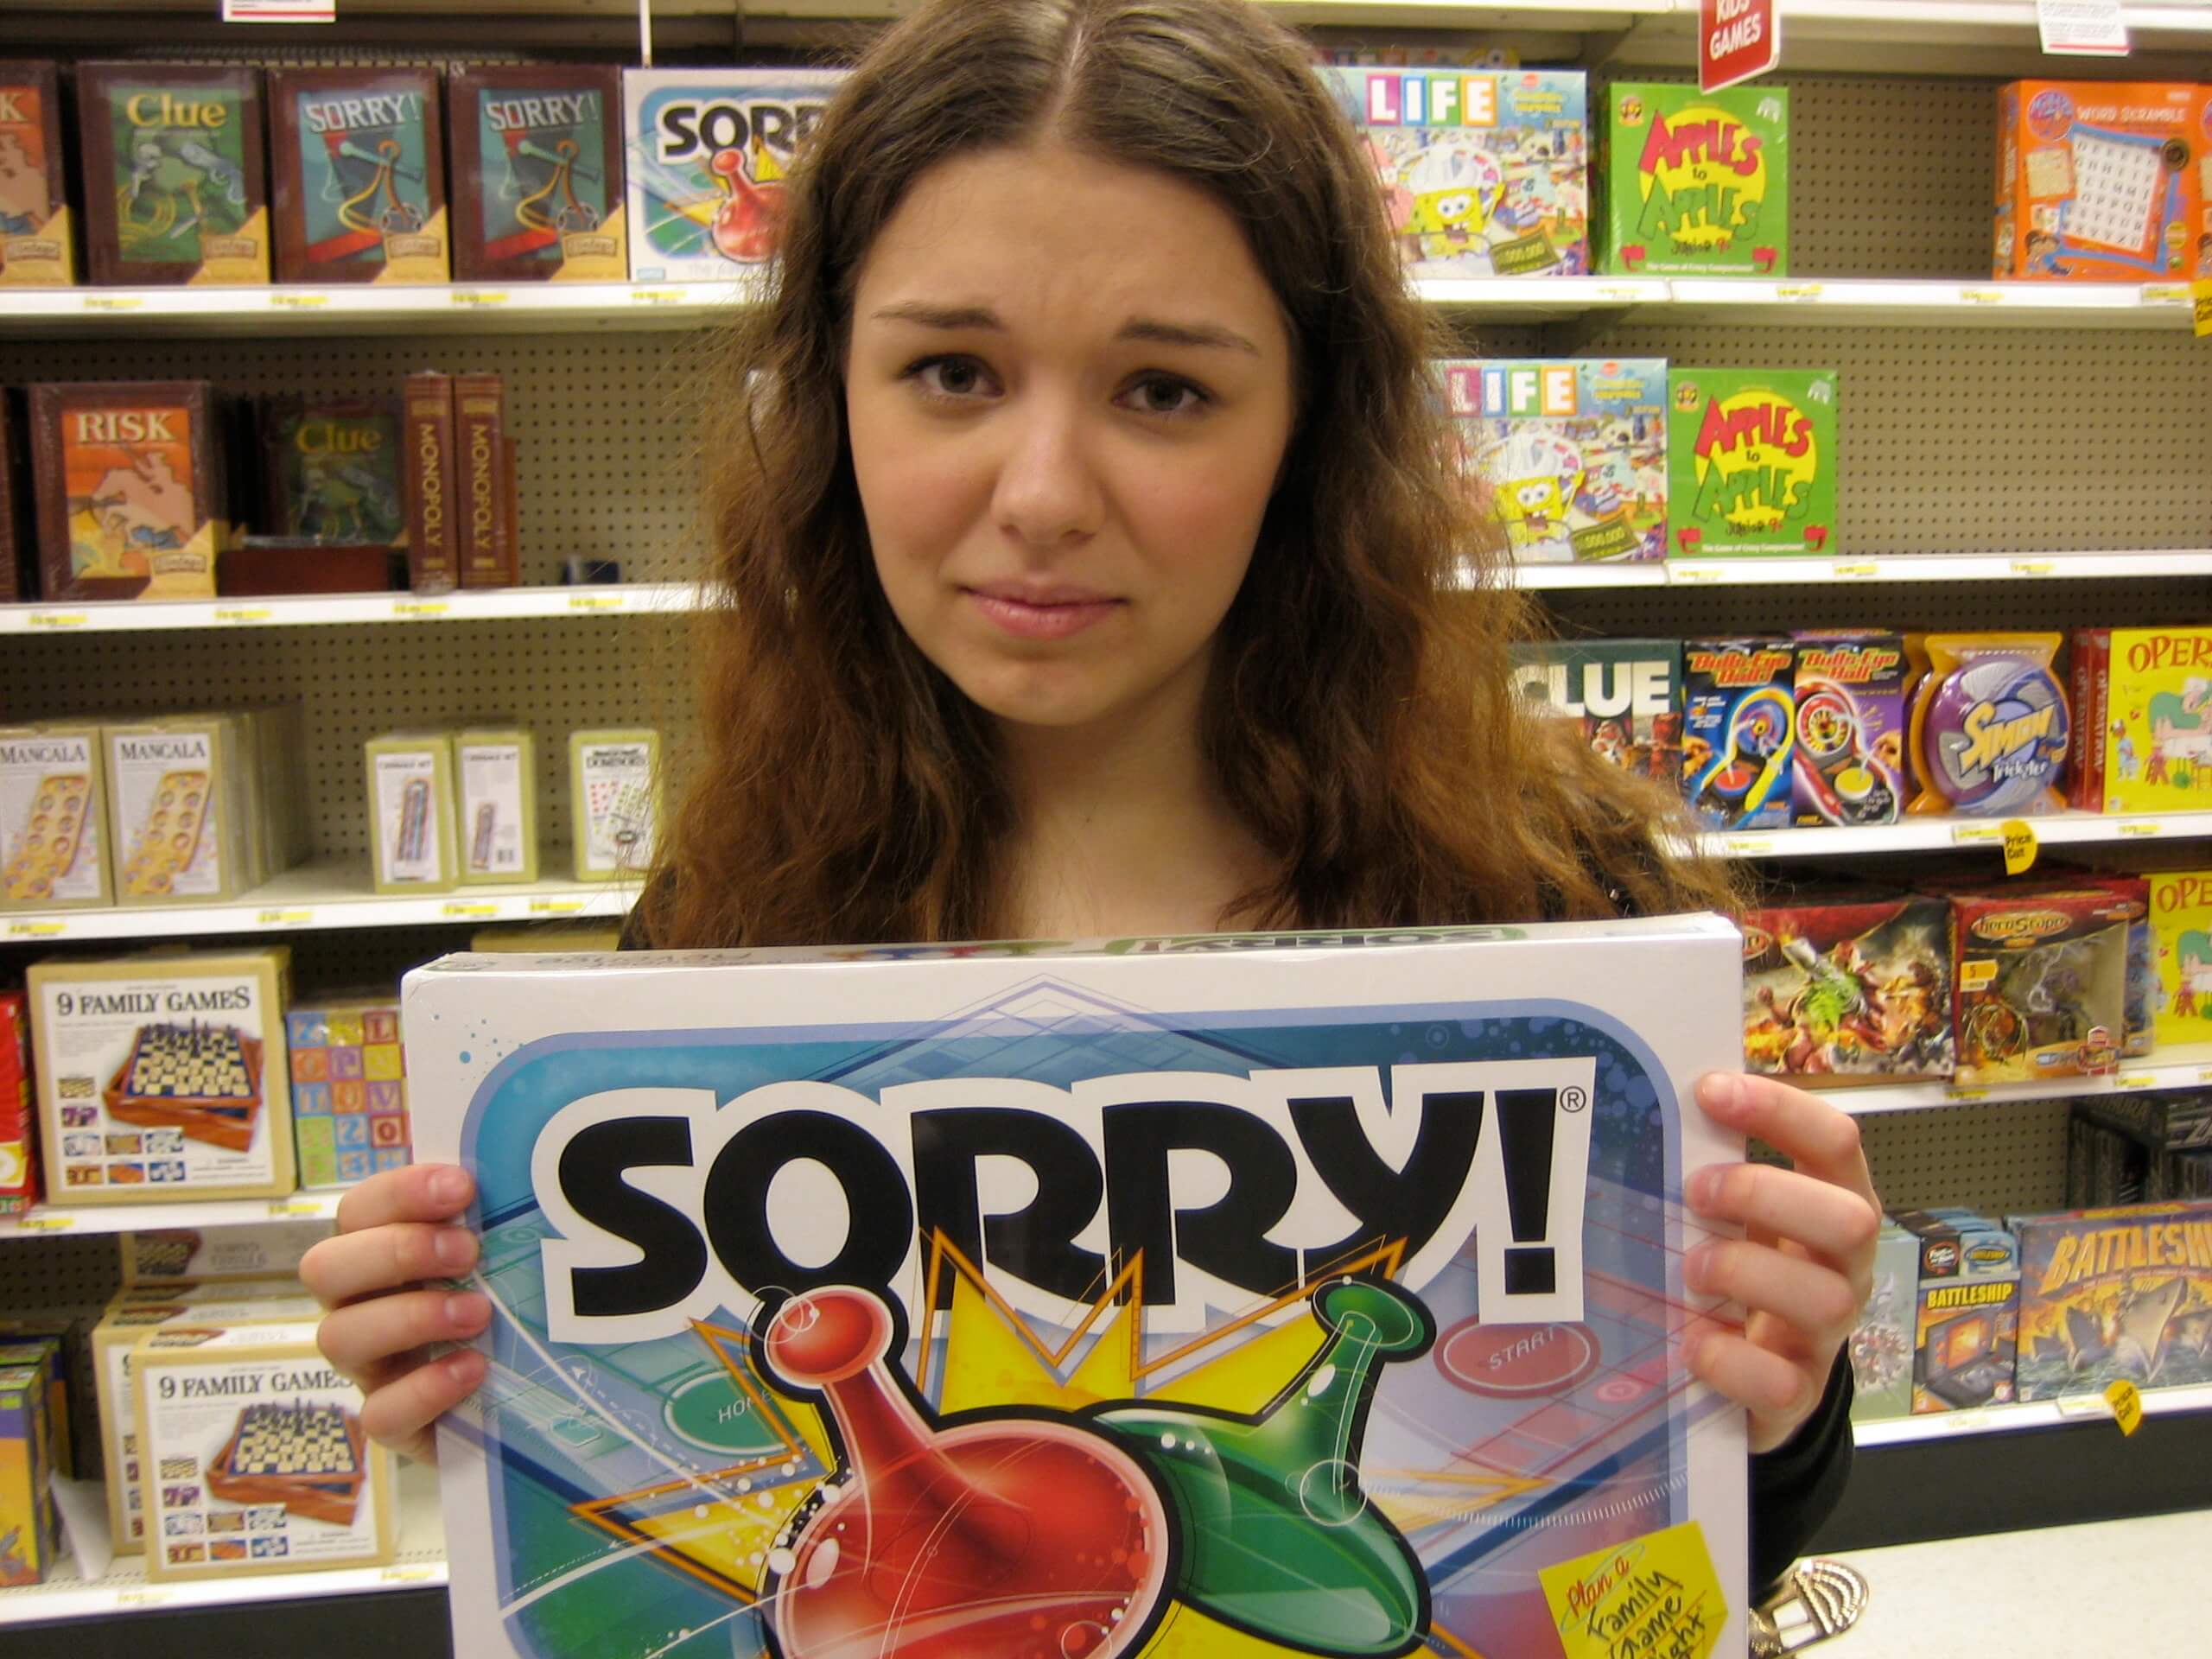 Woman-looking-at-camera-holding-Sorry-boardgame